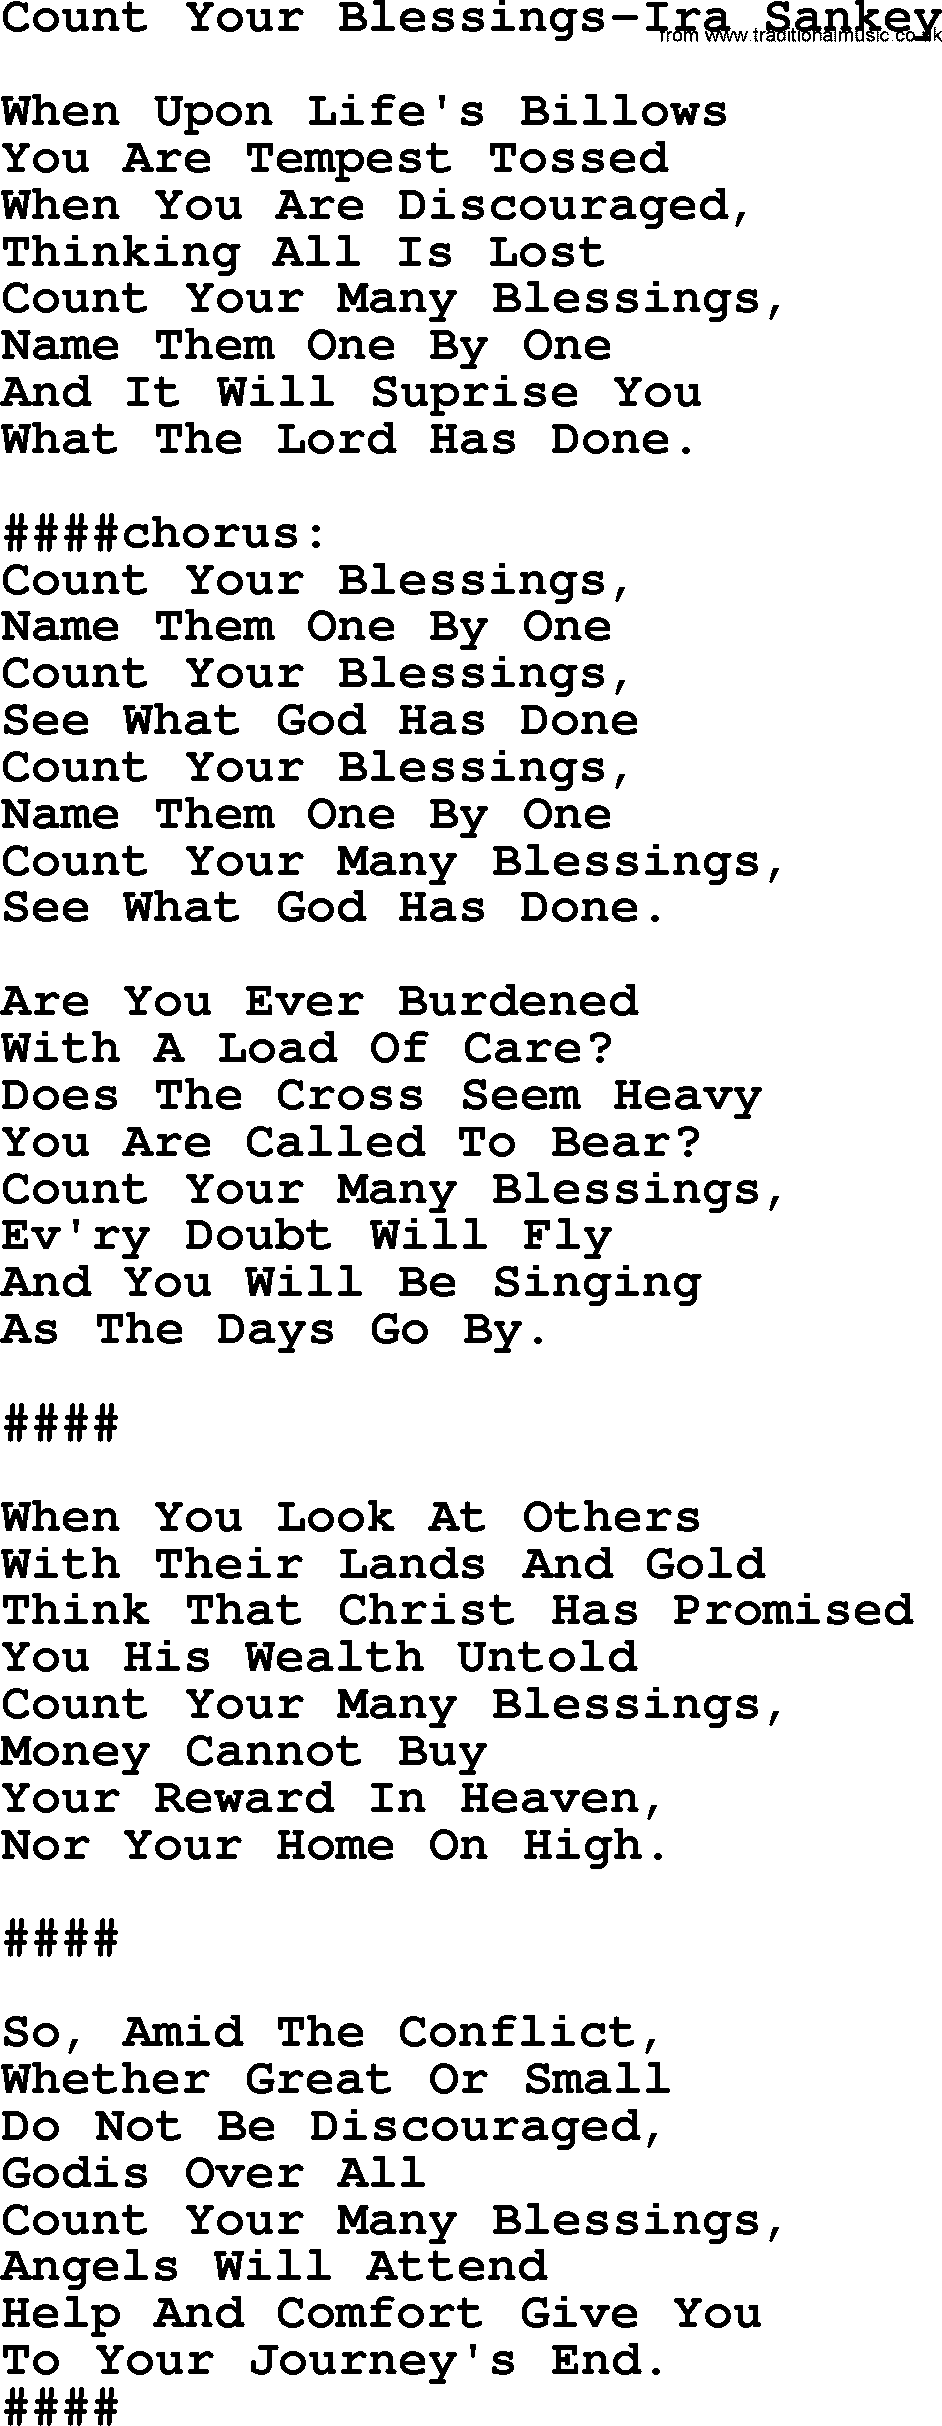 count-your-blessings-1959